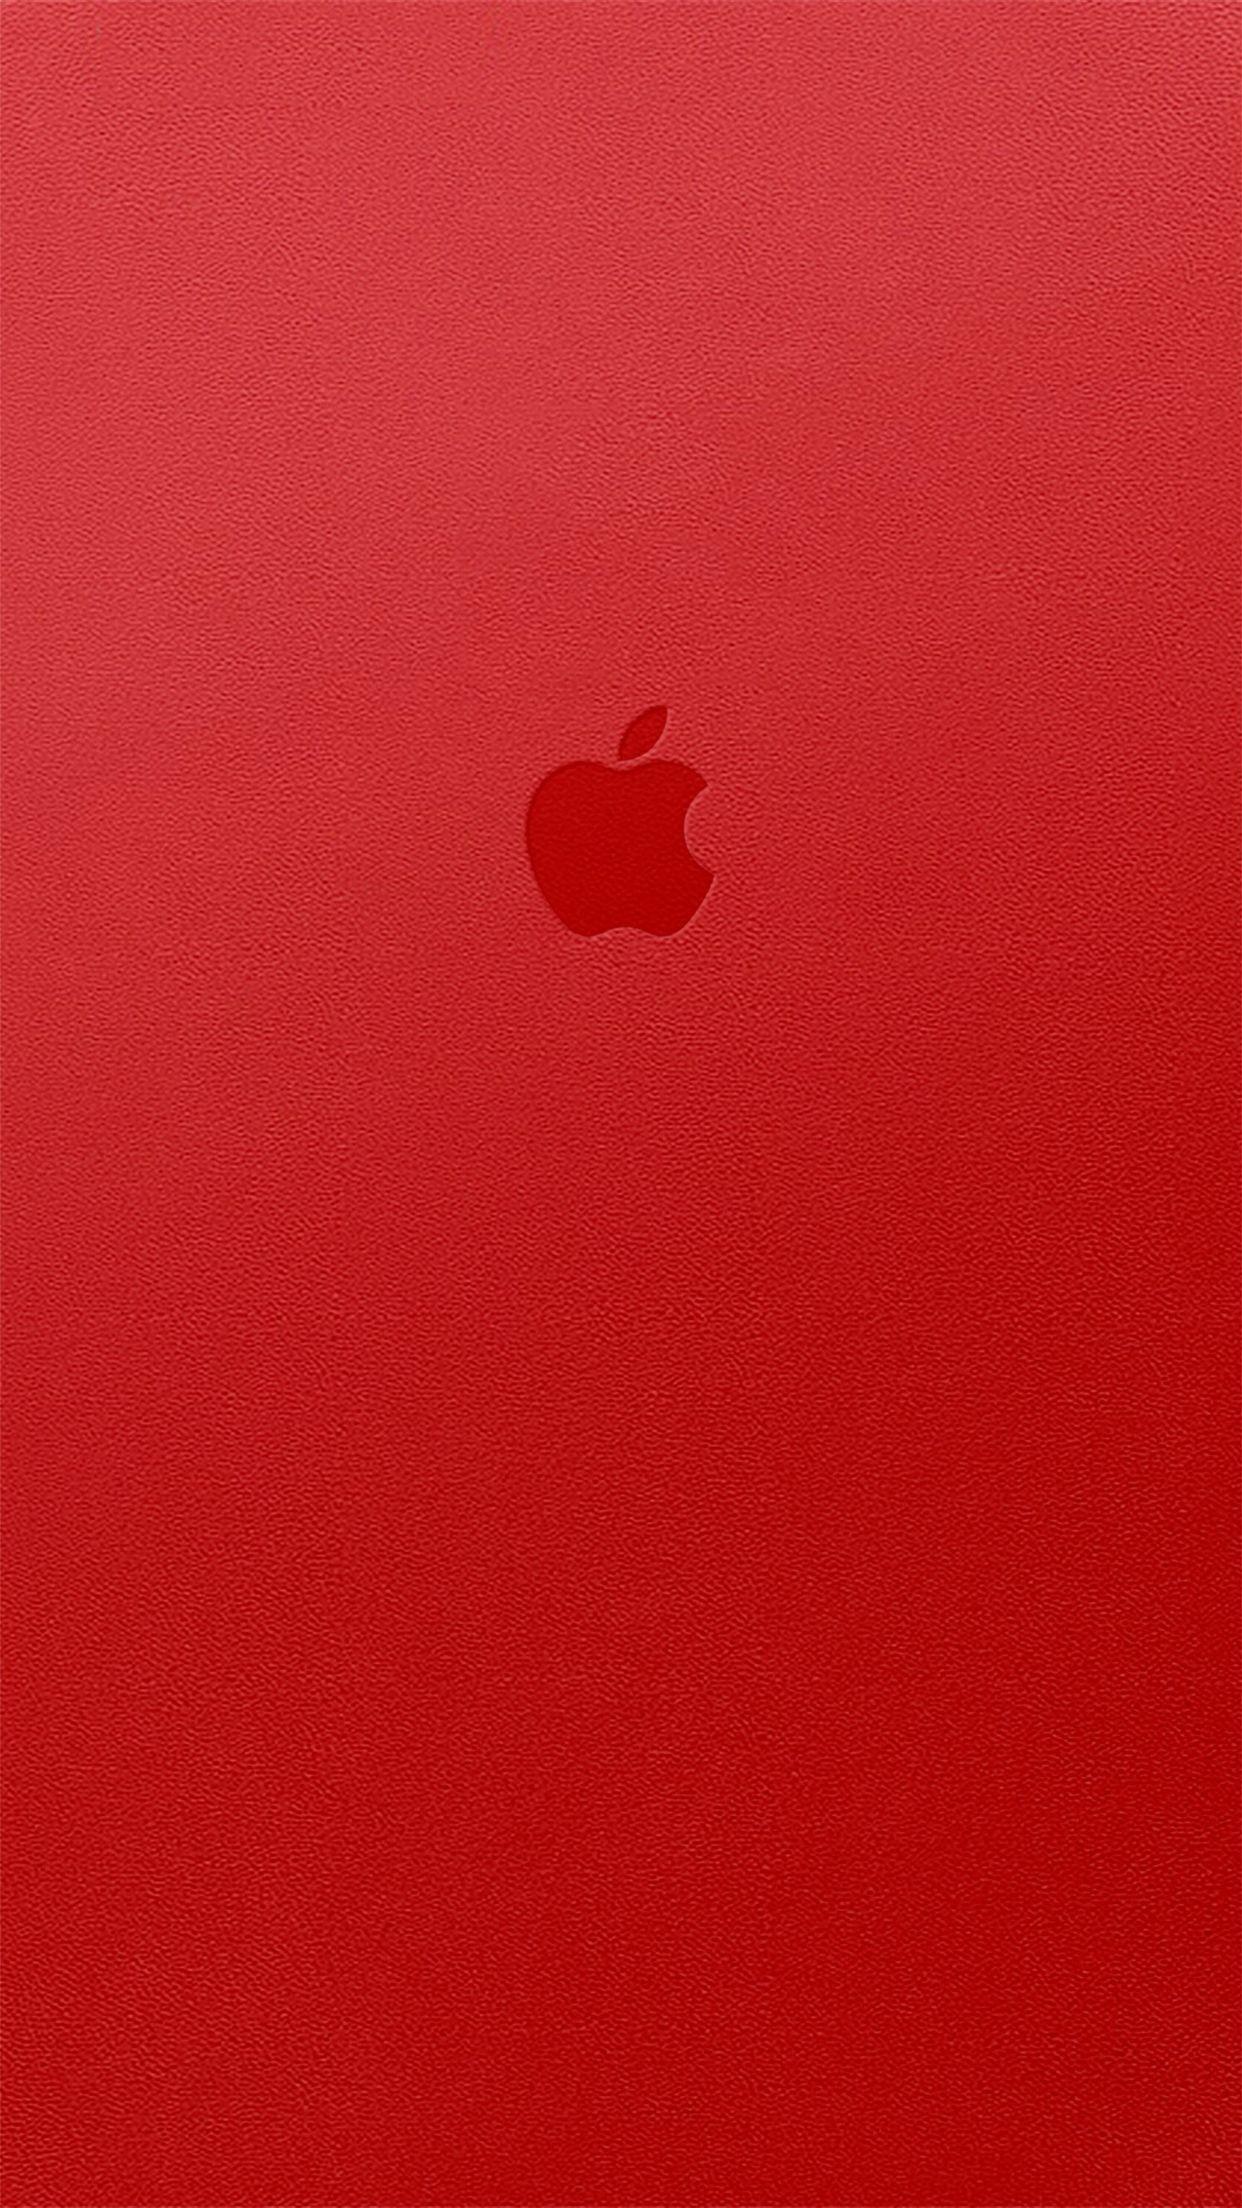 Red Apple Wallpapers Group 83